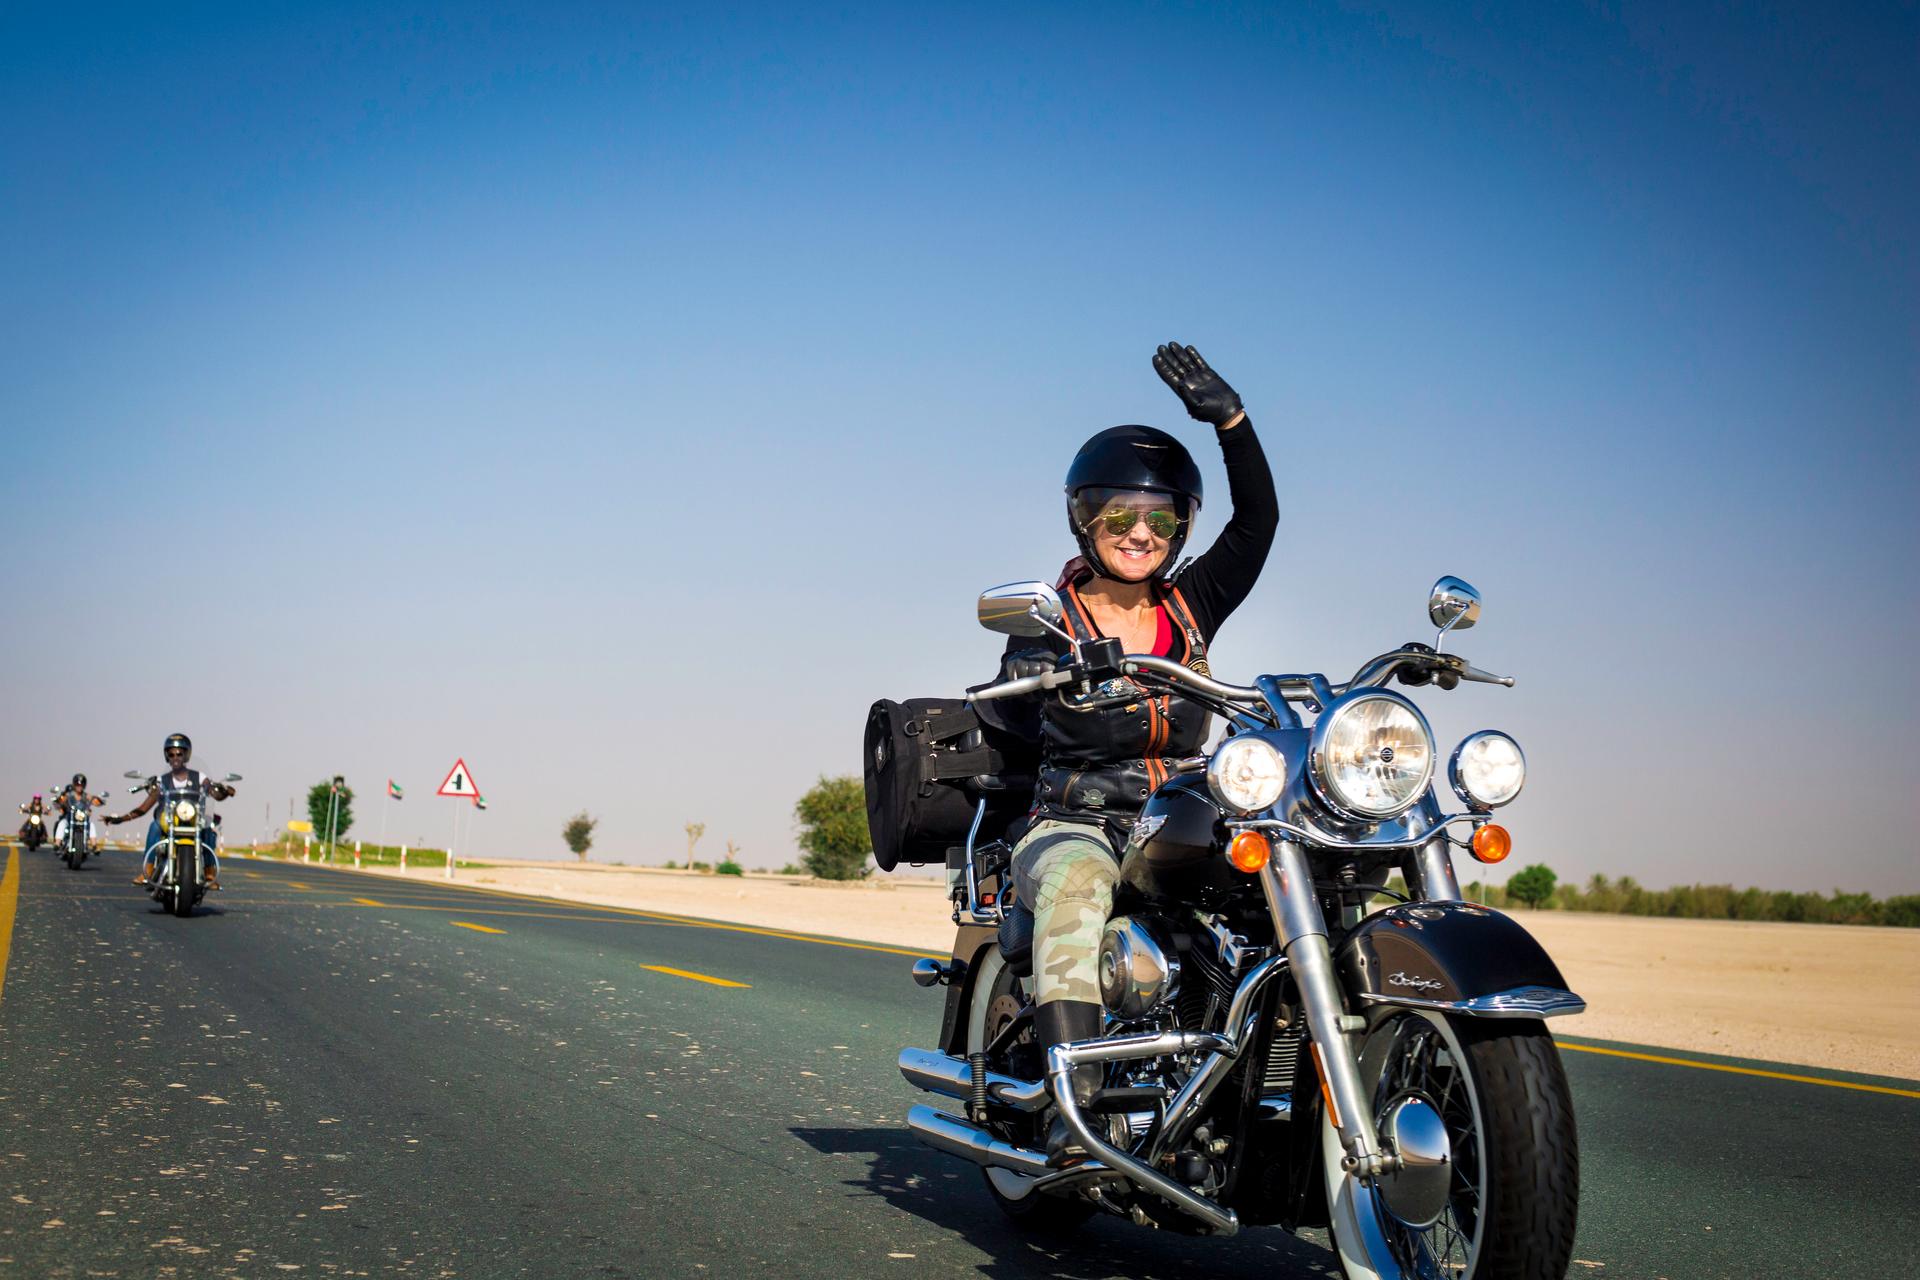 Dubai Ladies of Harley riders riding back to Dubai after marking International Female Ride Day two.